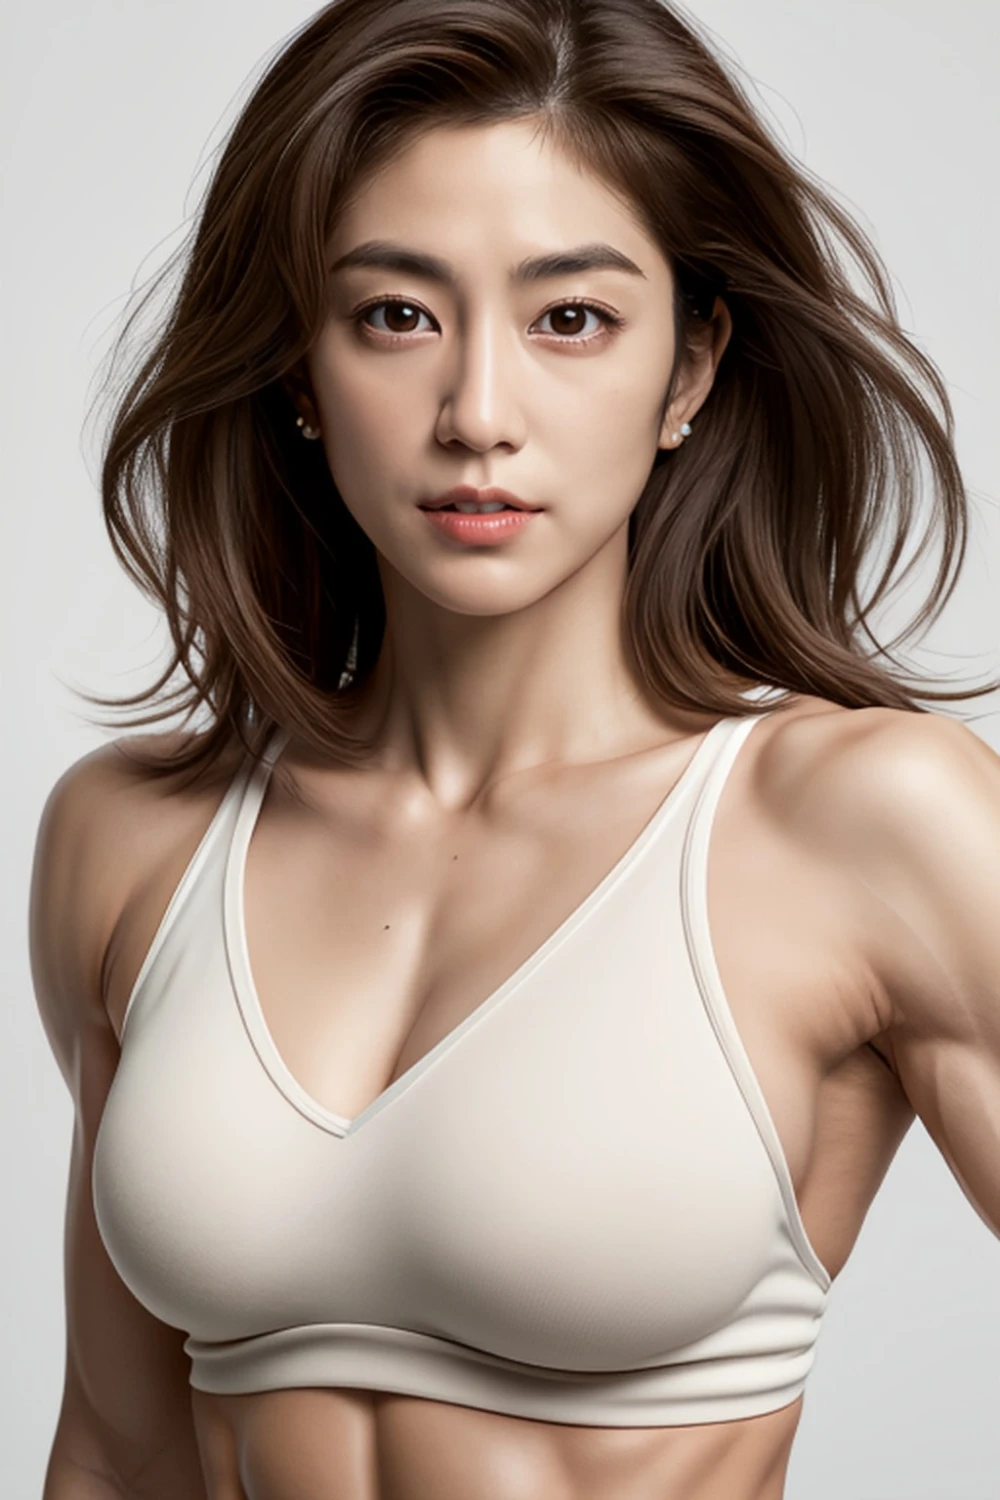 muscular-female-realistic-style-all-ages-23